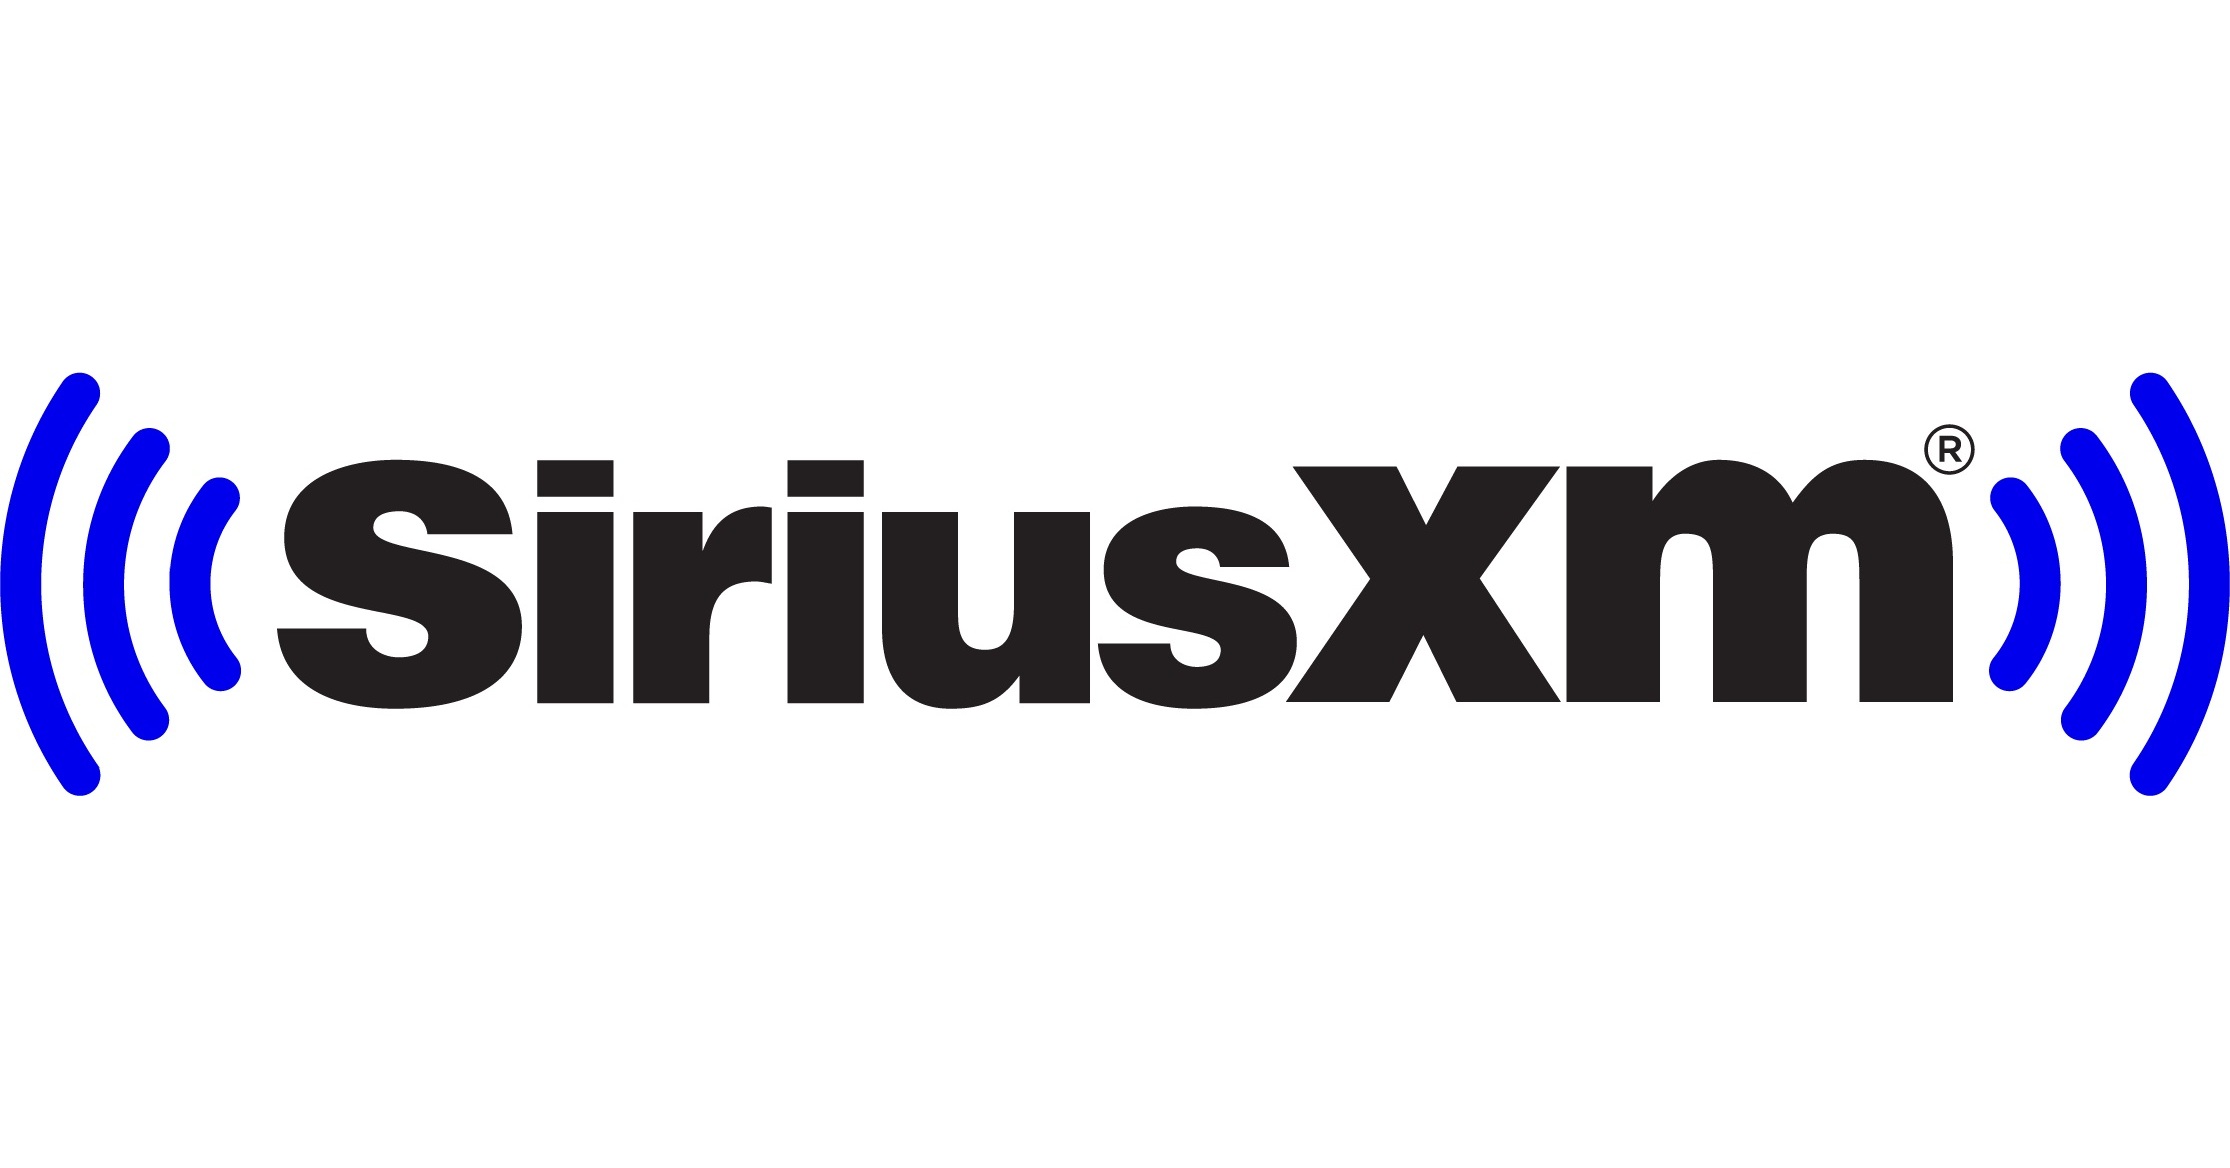 Siriusxm S Beloved Holiday Channels Arrive Early To Spread Cheer Across The Airwaves